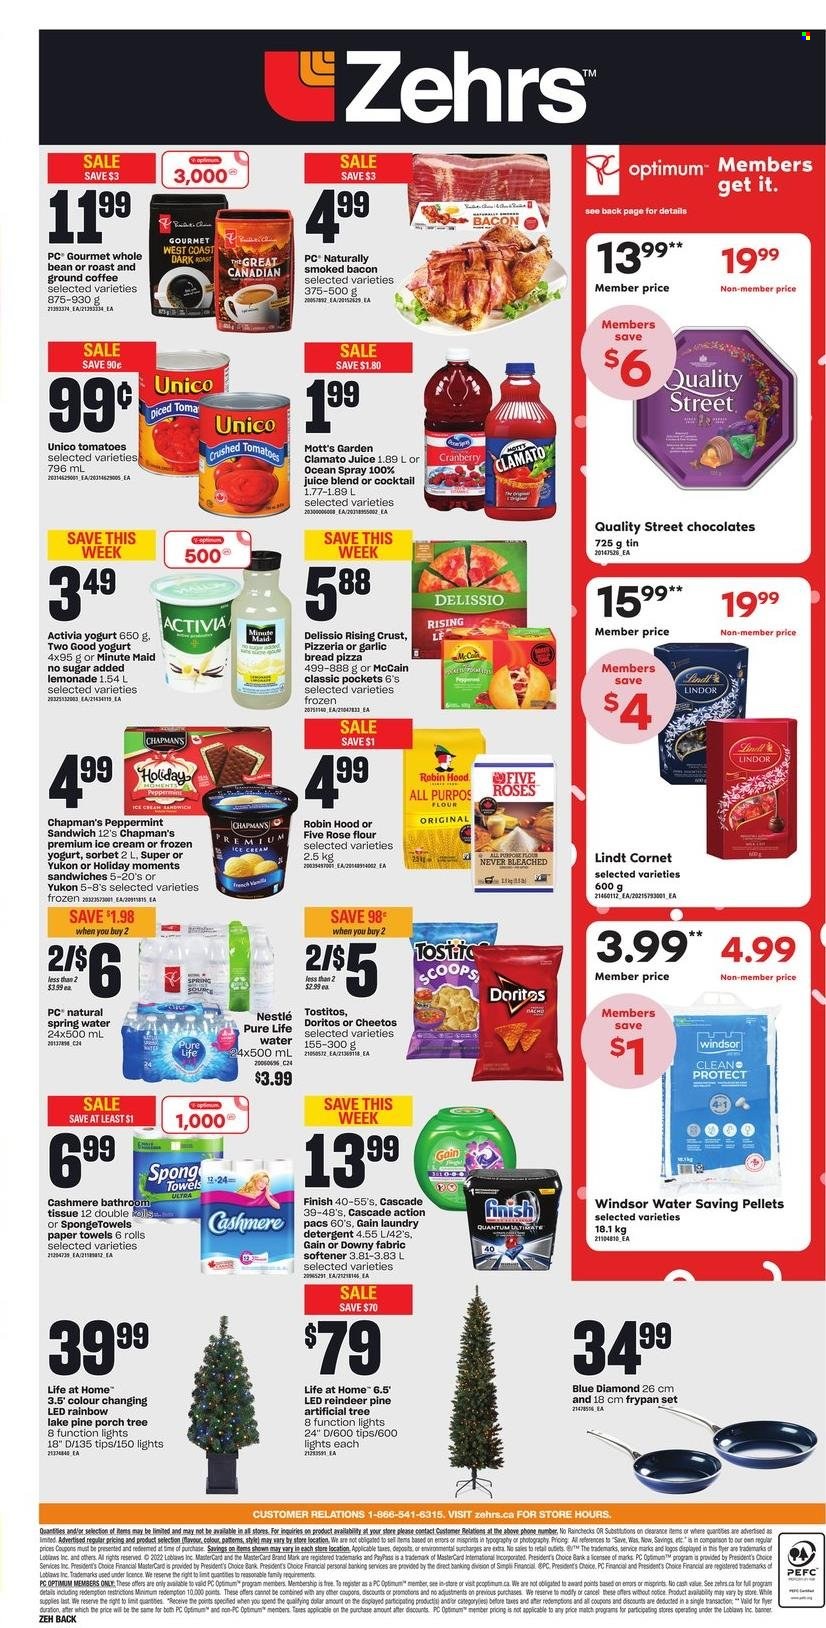 thumbnail - Zehrs Flyer - November 24, 2022 - November 30, 2022 - Sales products - bread, Mott's, pizza, bacon, Président, yoghurt, Activia, ice cream, ice cream sandwich, McCain, Doritos, Cheetos, Tostitos, all purpose flour, flour, crushed tomatoes, Blue Diamond, lemonade, juice, Clamato, fruit punch, spring water, coffee, ground coffee, rosé wine, bath tissue, kitchen towels, paper towels, Gain, fabric softener, laundry detergent, Cascade, Downy Laundry, frying pan, Optimum, Moments, reindeer, detergent, Nestlé, Lindt, Lindor. Page 2.